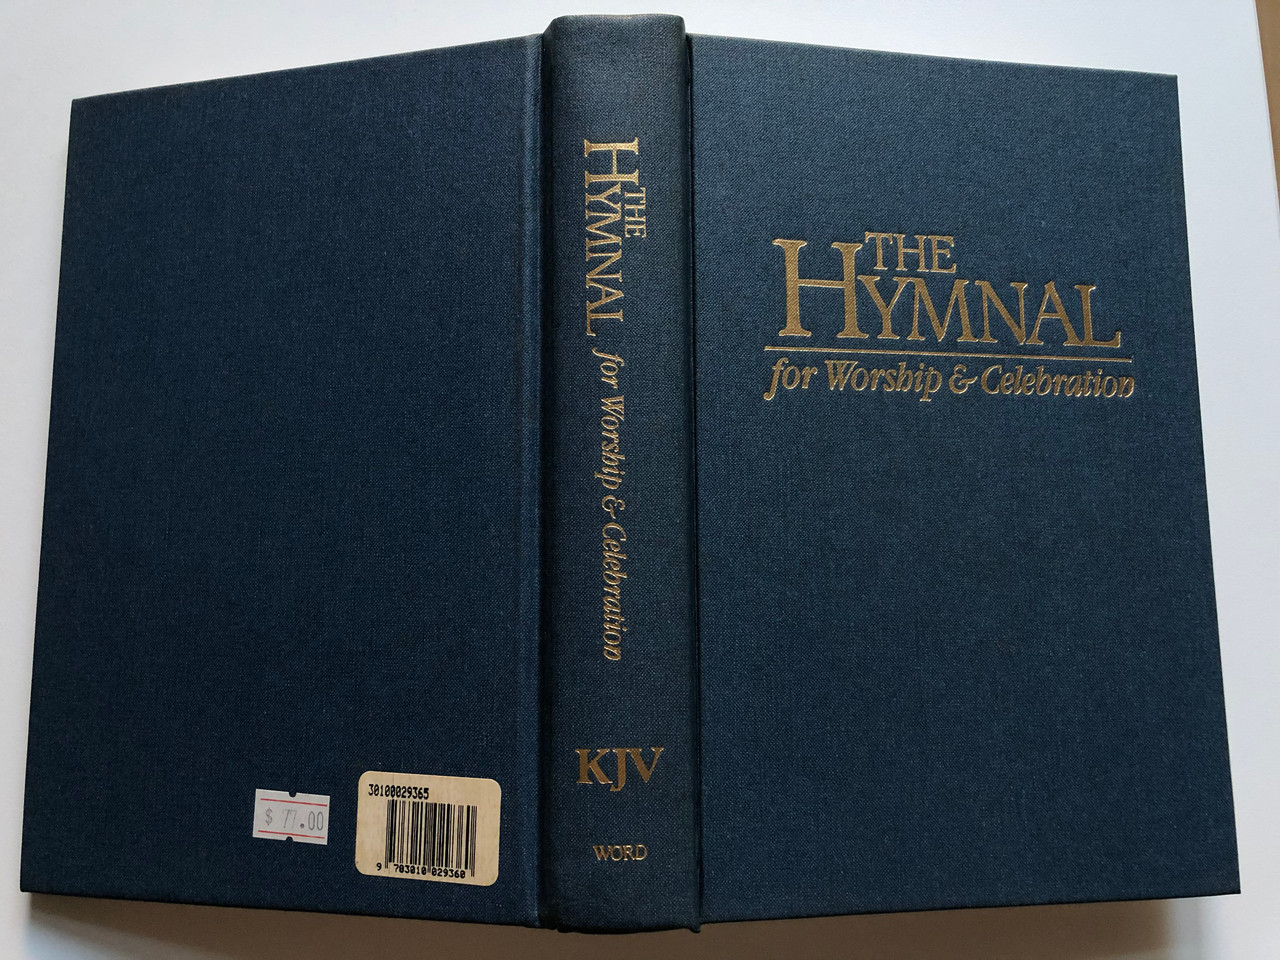 https://cdn10.bigcommerce.com/s-62bdpkt7pb/products/50442/images/257346/The_Hymnal_for_Worship_Celebration_13__30444.1667226449.1280.1280.JPG?c=2